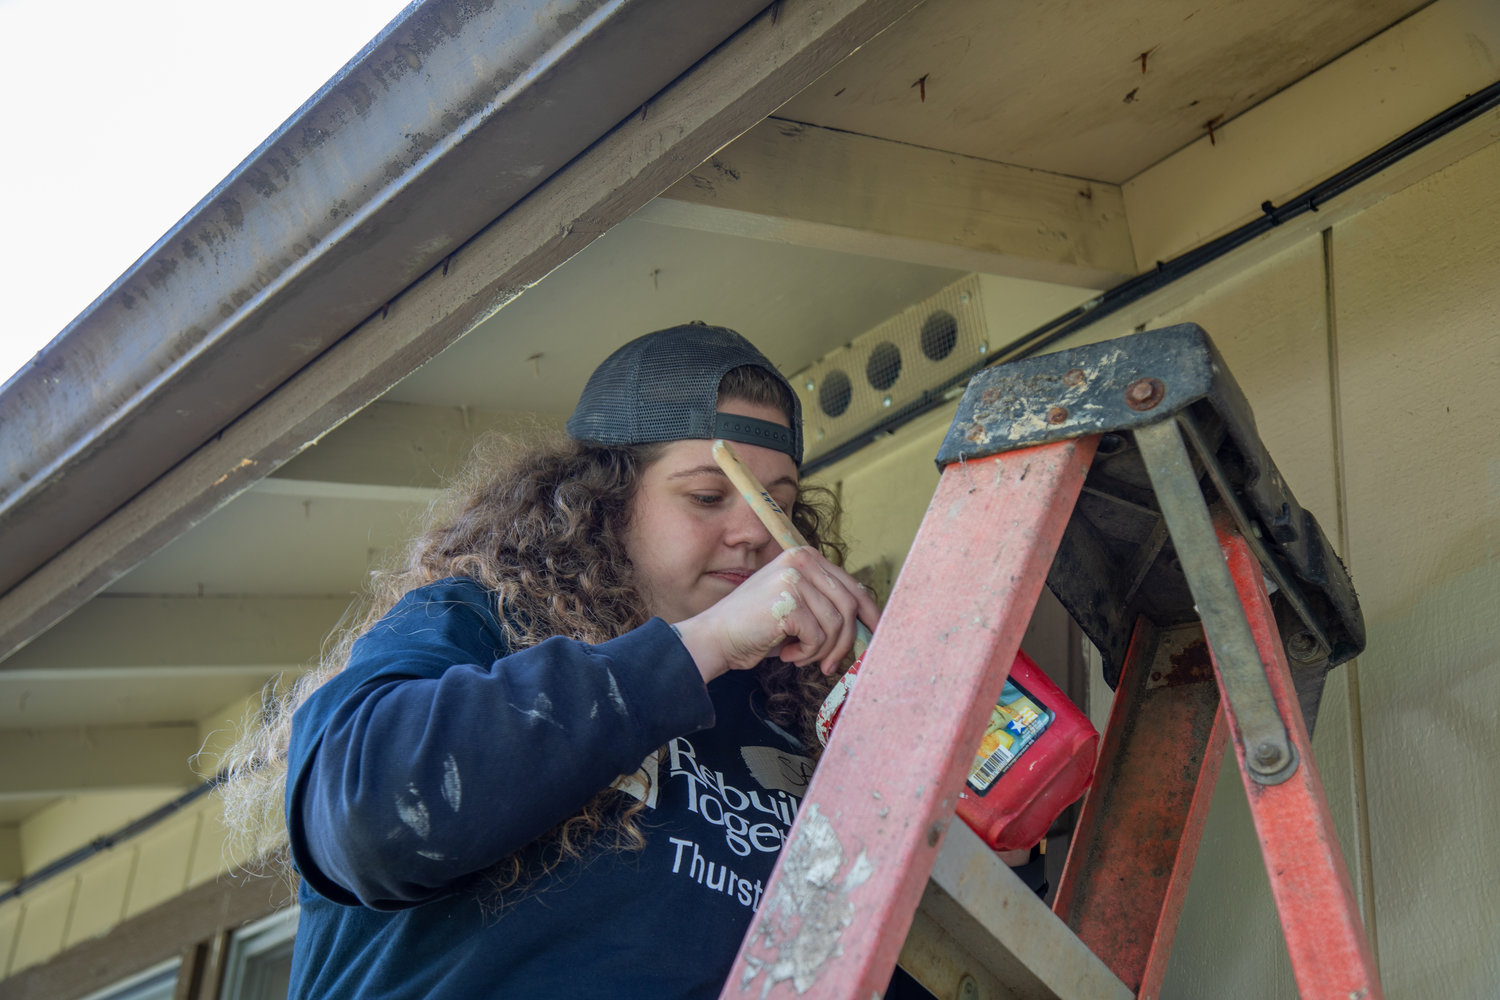 A Rebuilding Together Thurston County volunteer makes repairs on a client's home.